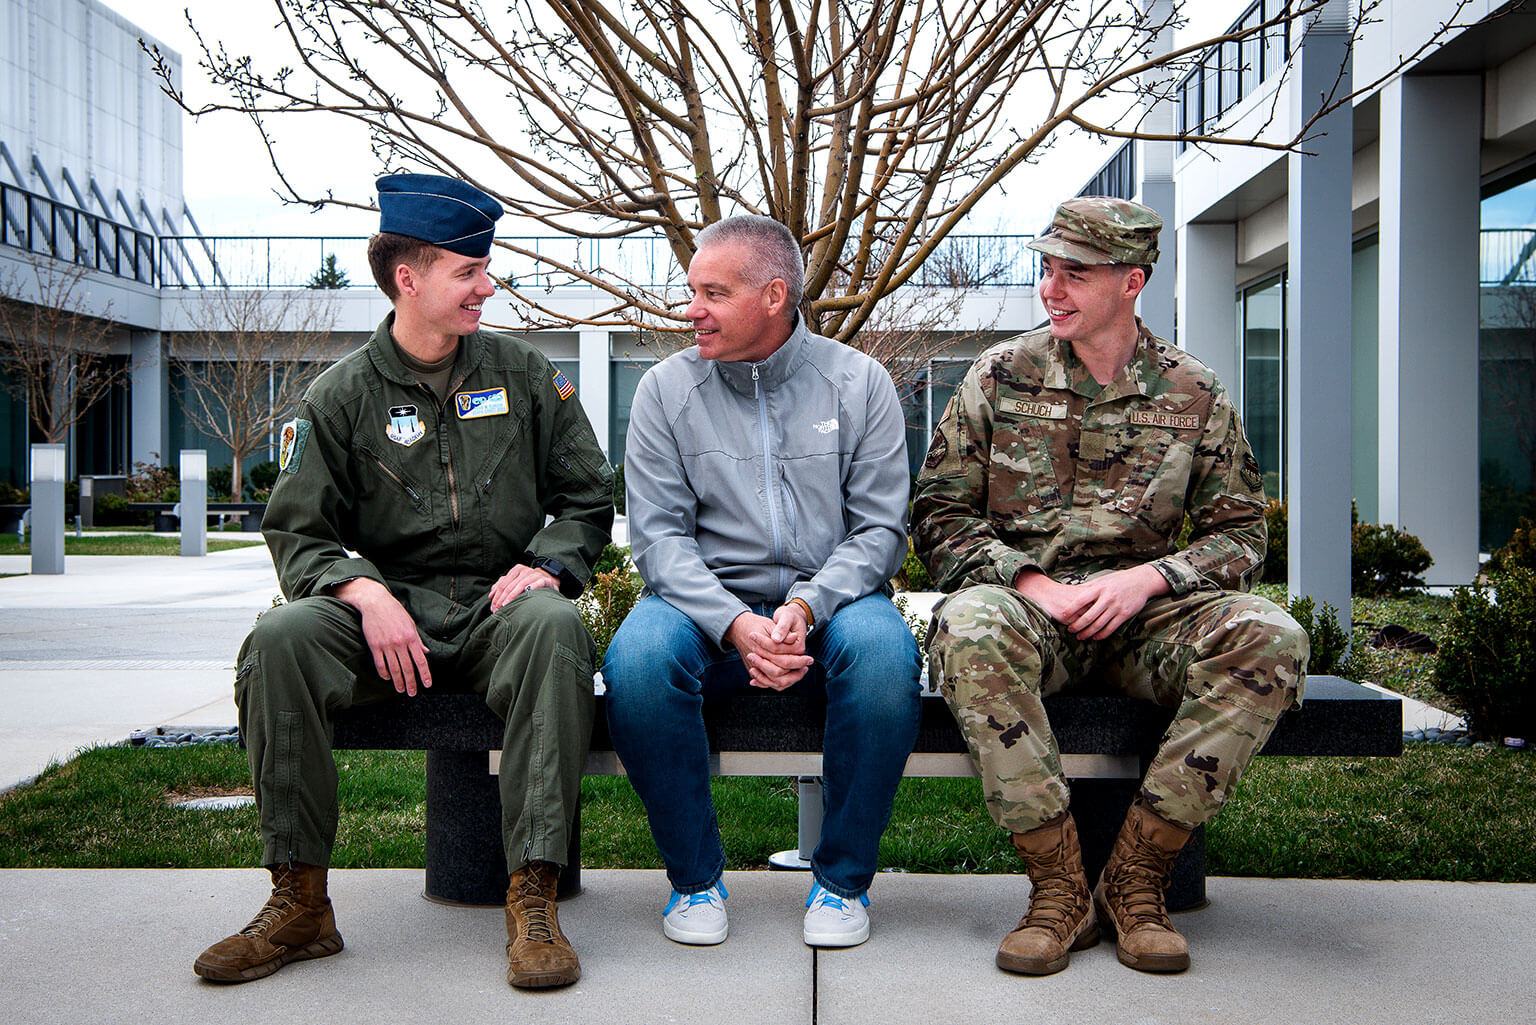 Cadet 2nd Class Chad Schuch Jr. and Cadet 4th Class Dylan Schuch talk to their father, Chad Schuch Sr. outside Polaris Hall.